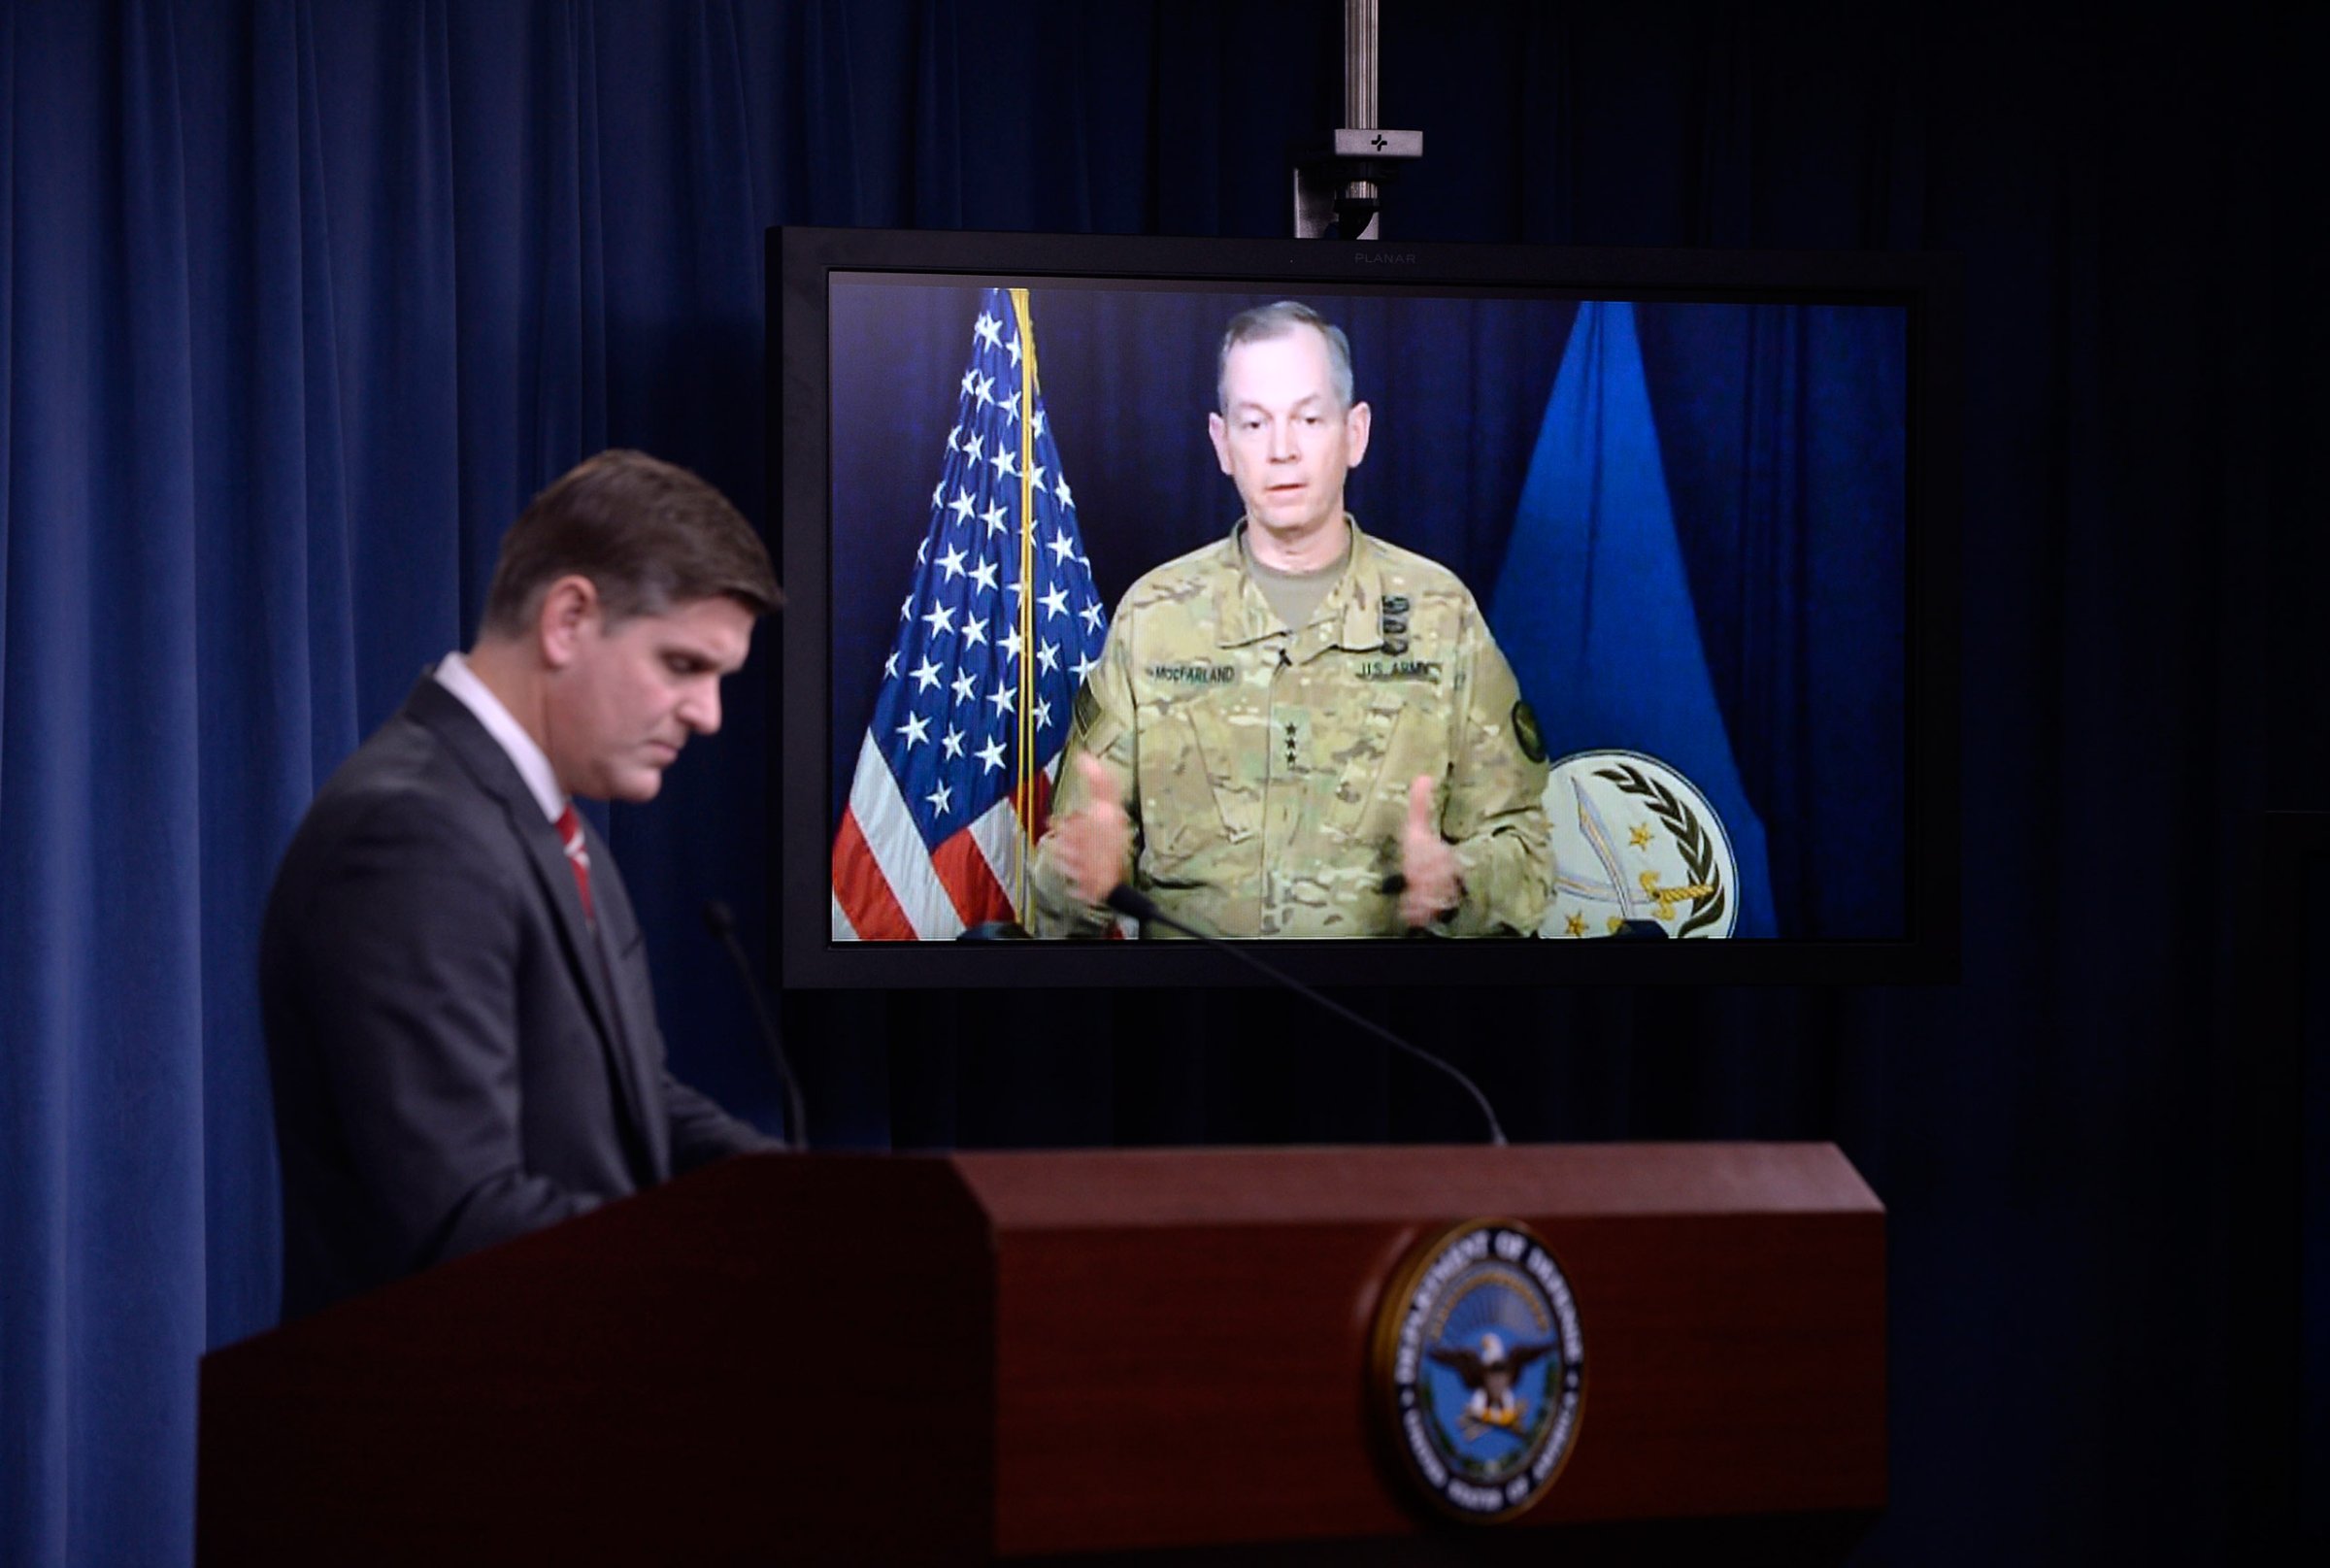 ARLINGTON, VA - FEBRUARY 1: Combined Joint Task Force Commander Army Lt. Gen. Sean MacFarland speaks via teleconference from Baghdad, Iraq as Pentagon Press Secretary Peter Cook listens during a media briefing at the Pentagon to update operations on Operation Inherent Resolve on February 1, 2016 in Arlington, Virginia. It was reported that U.S. and coalition military forces have continued to attack Islamic State of Iraq and the Levant terrorists in Syria and Iraq as part of Operation Inherent Resolve. (Photo by Olivier Douliery/Getty Images)